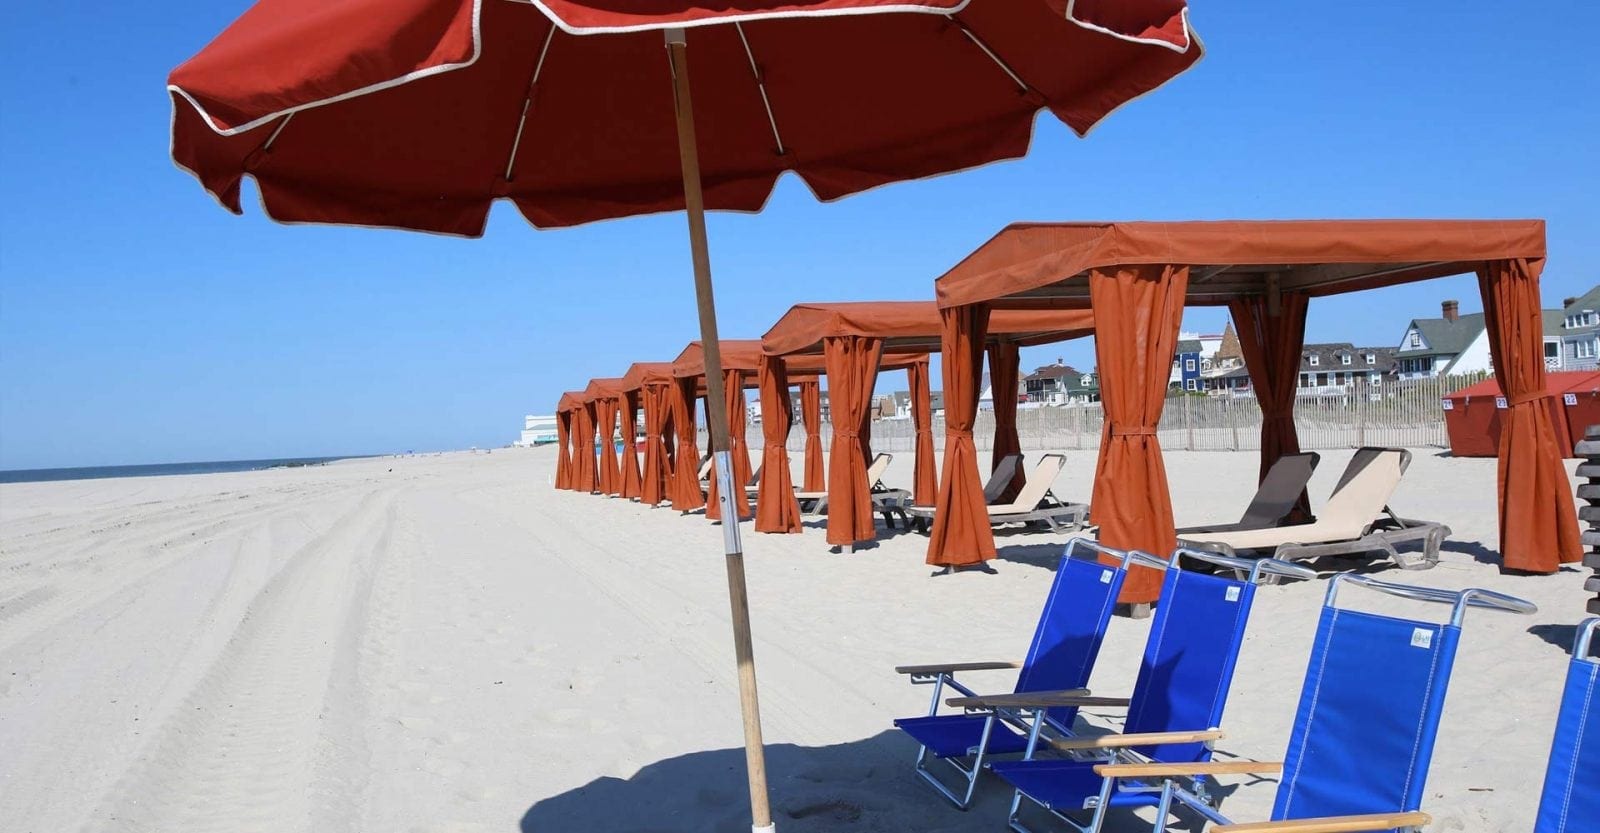 Montreal Beach Resort: Cape May Hotel Specials 